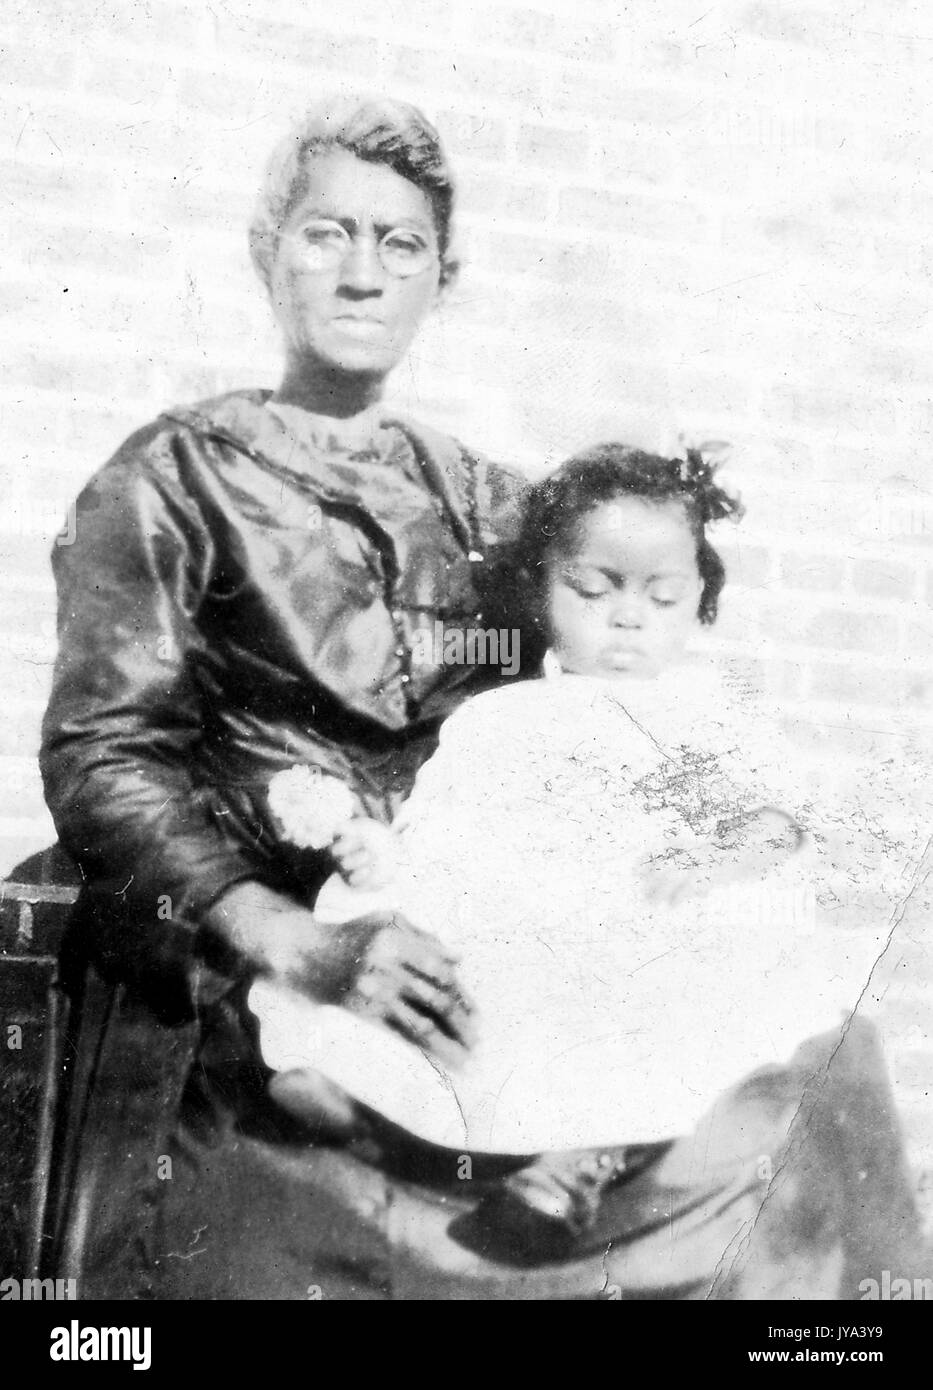 African American grandmother and grandchild, the grandmother wearing spectacles with her hair in a bun, the young grandchild sitting on her lap and wearing a white dress with her eyes closed, 1915. Stock Photo